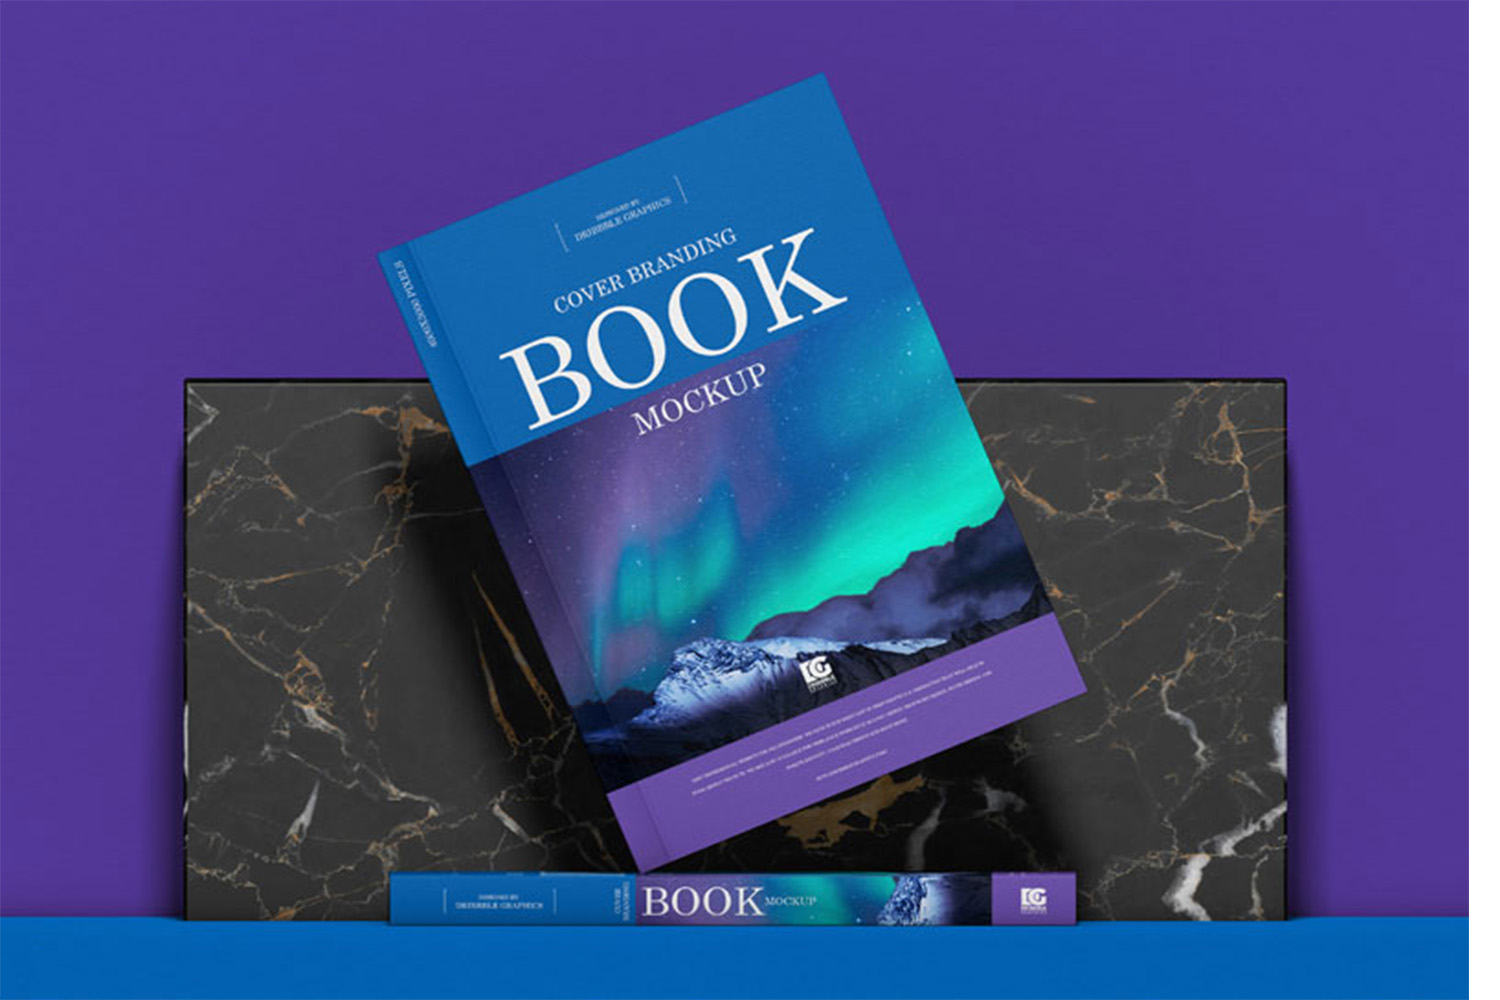 Covers Book Mockup Free Download